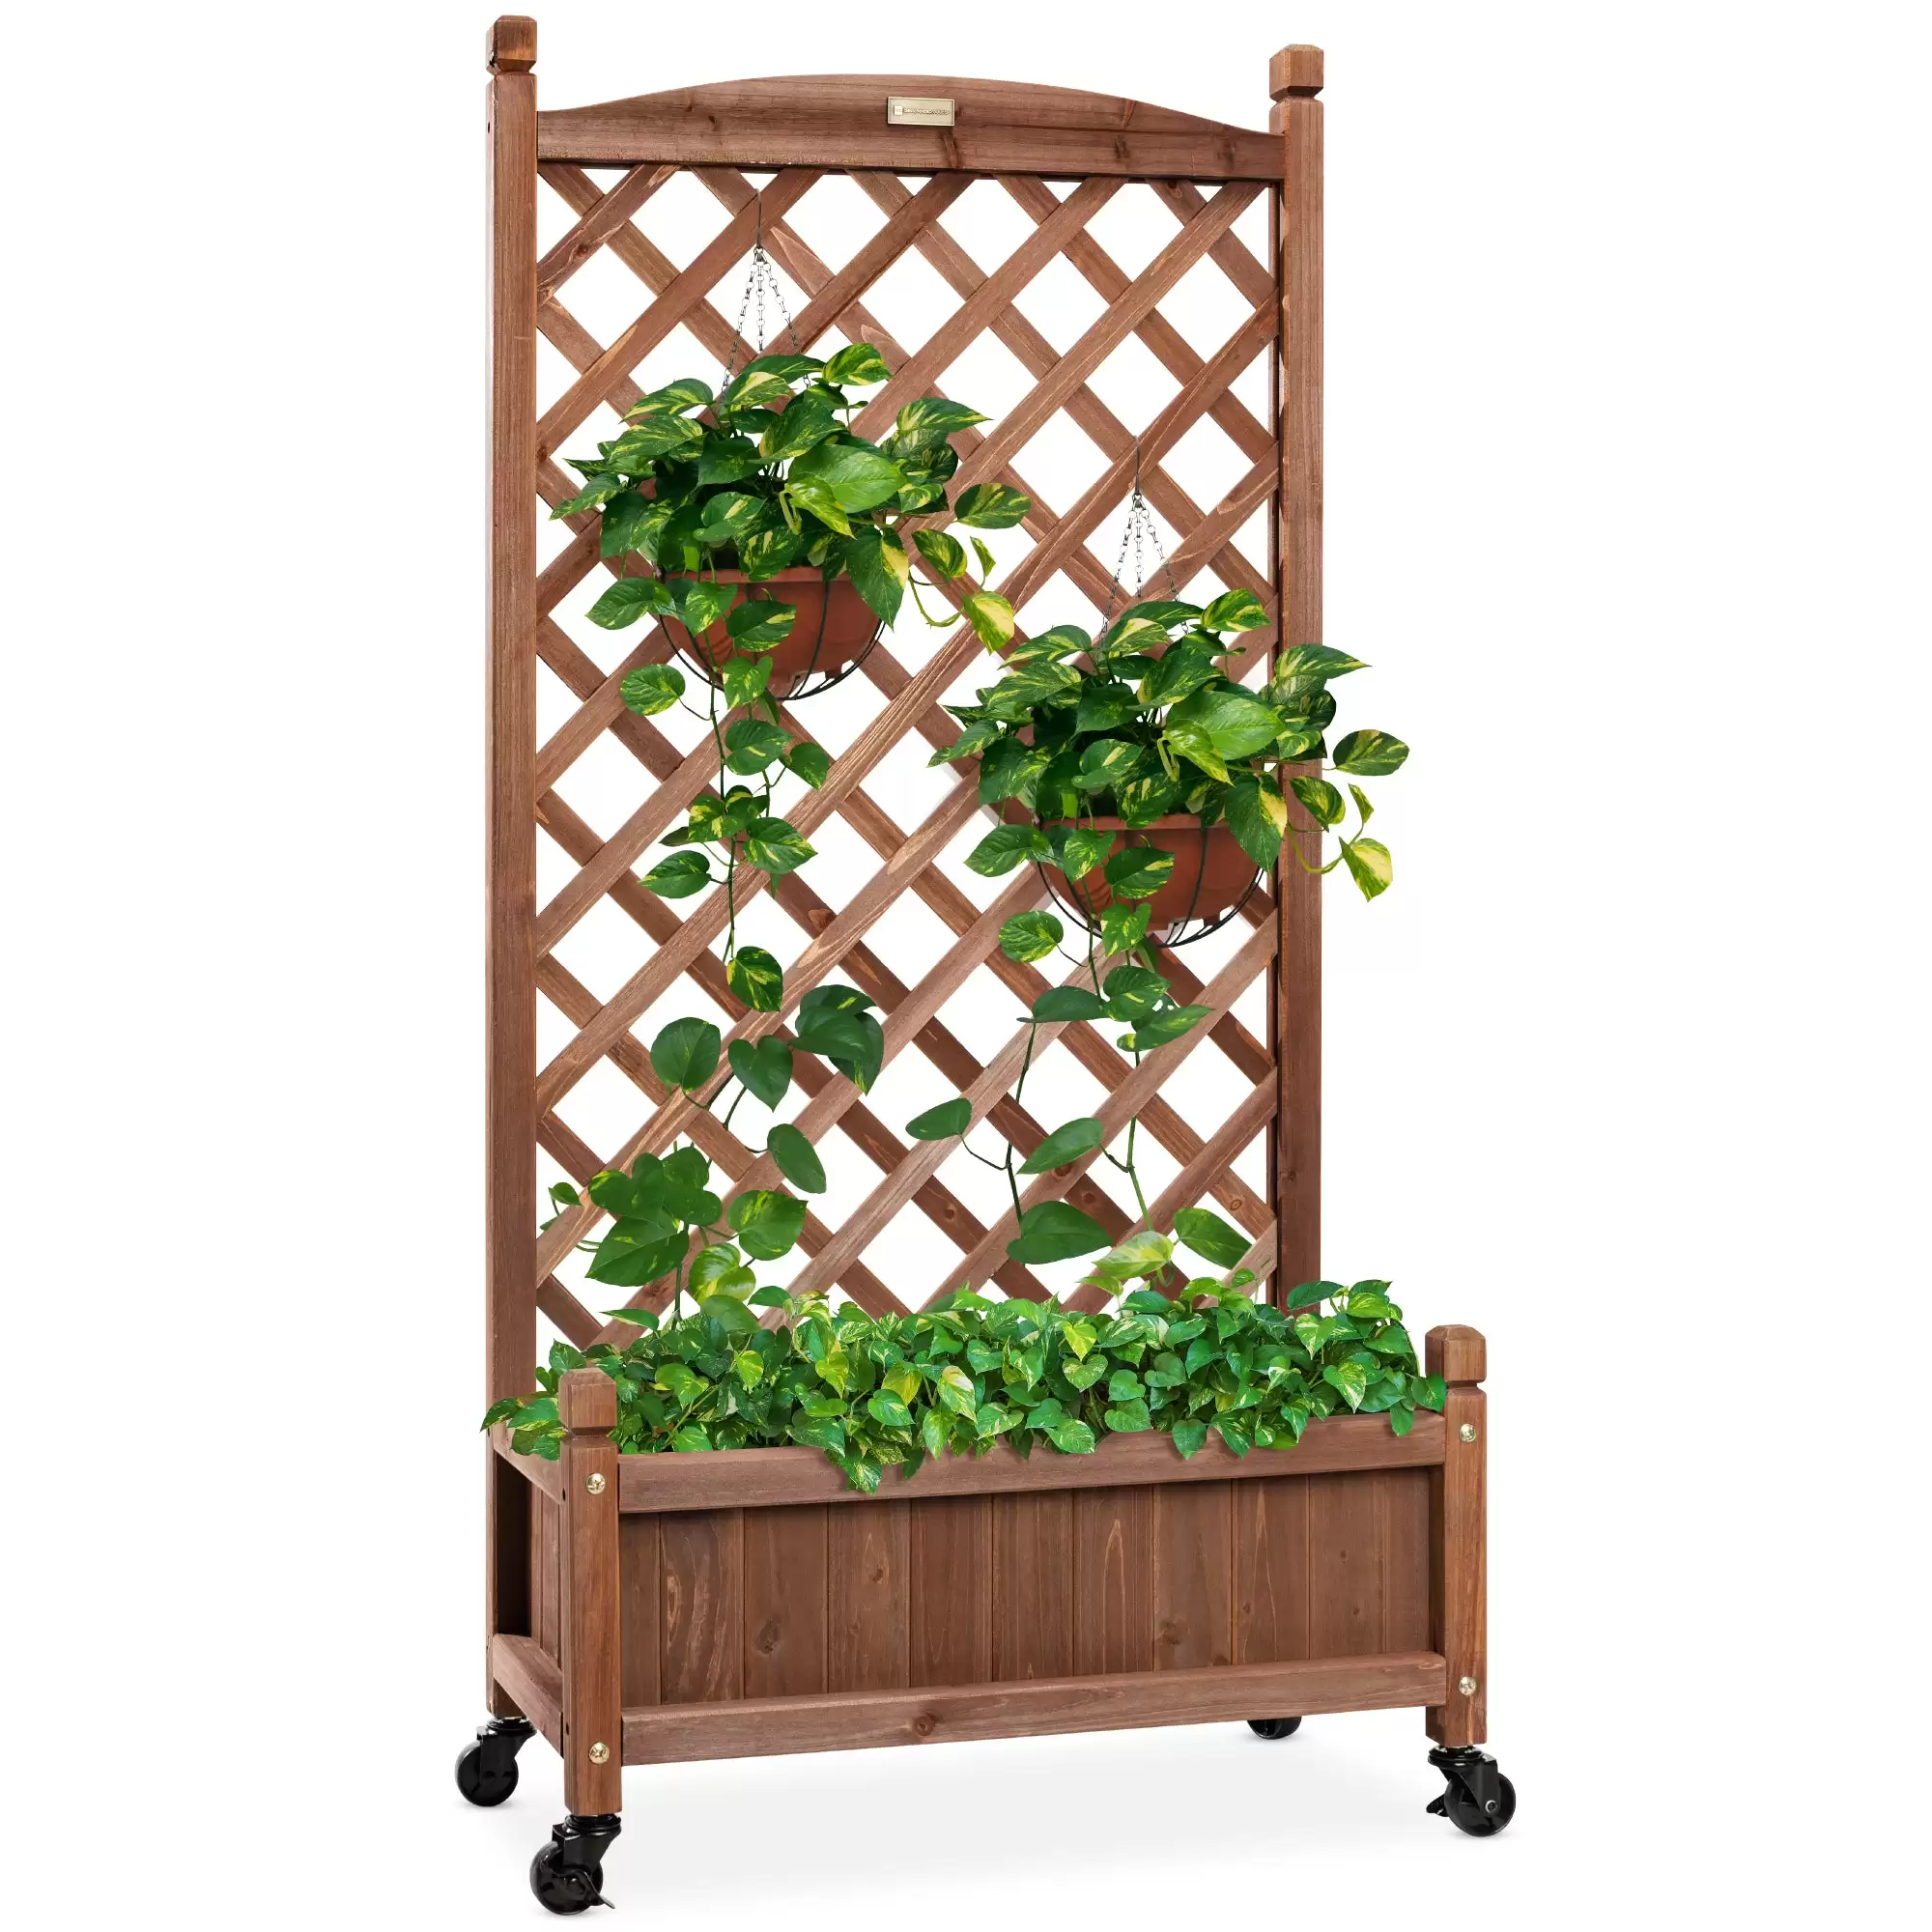 Spend $69.99 Wood Planter Box & Lattice Trellis W/ Drainage, Optional Wheels - 48in At Bestchoiceproducts